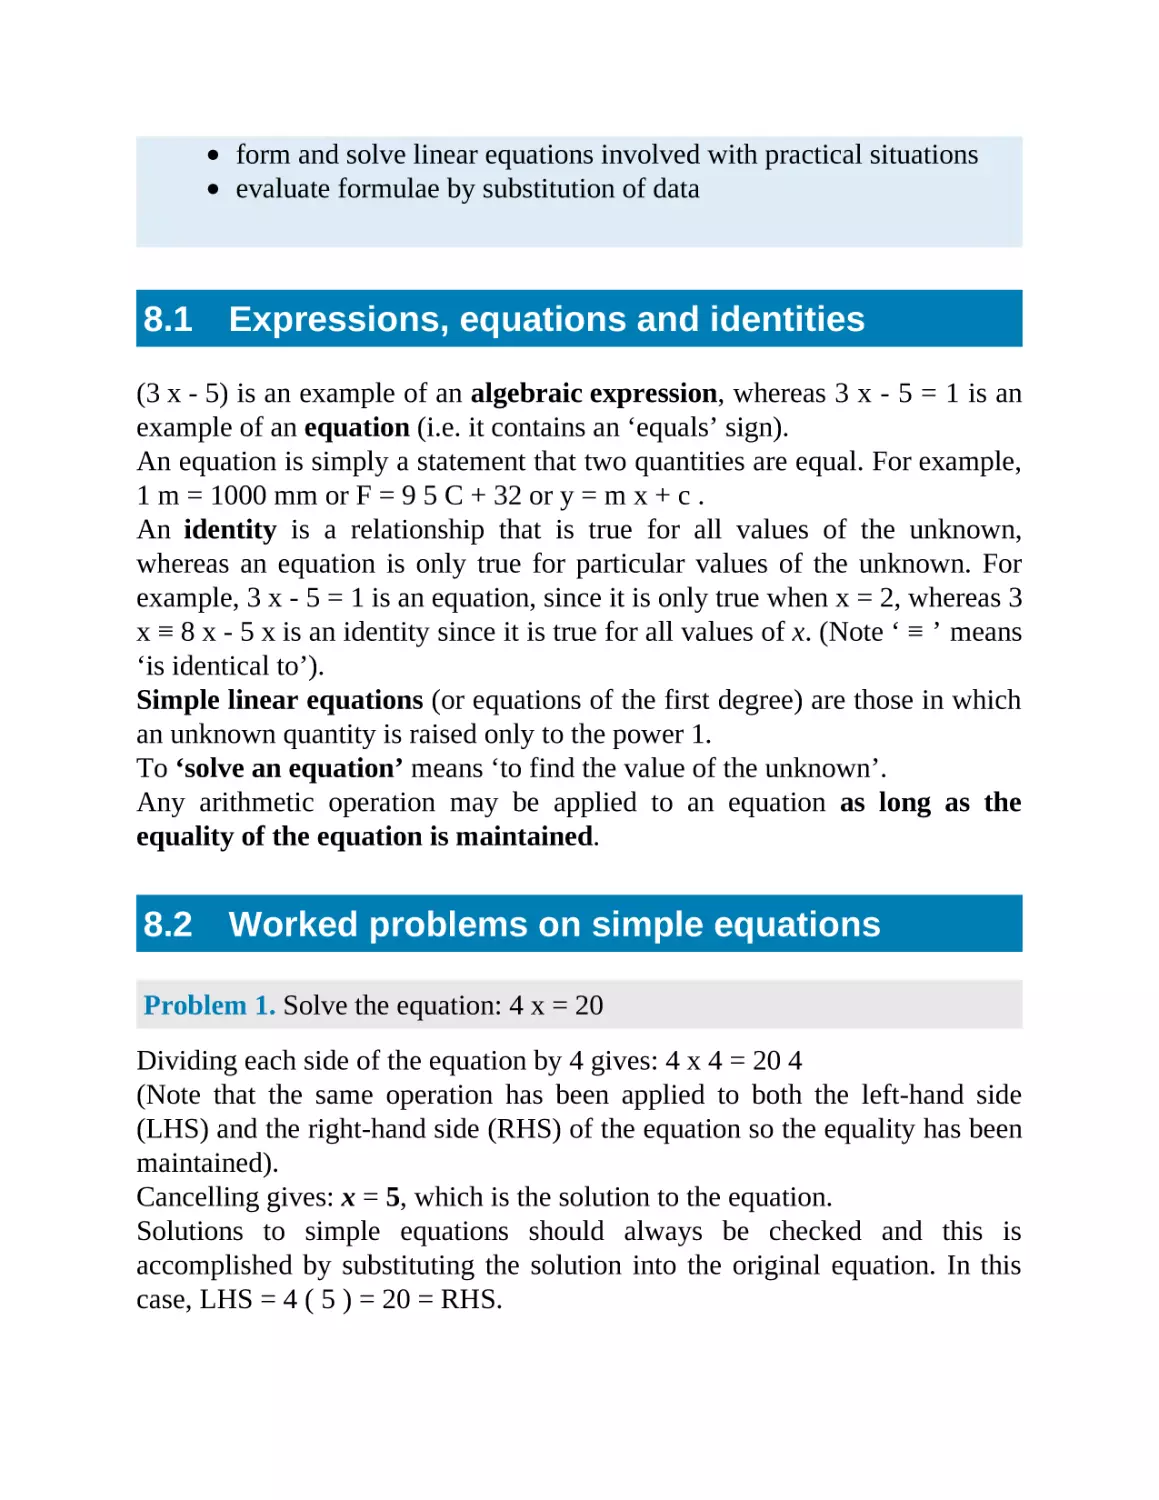 8.1 Expressions, equations and identities
8.2 Worked problems on simple equations